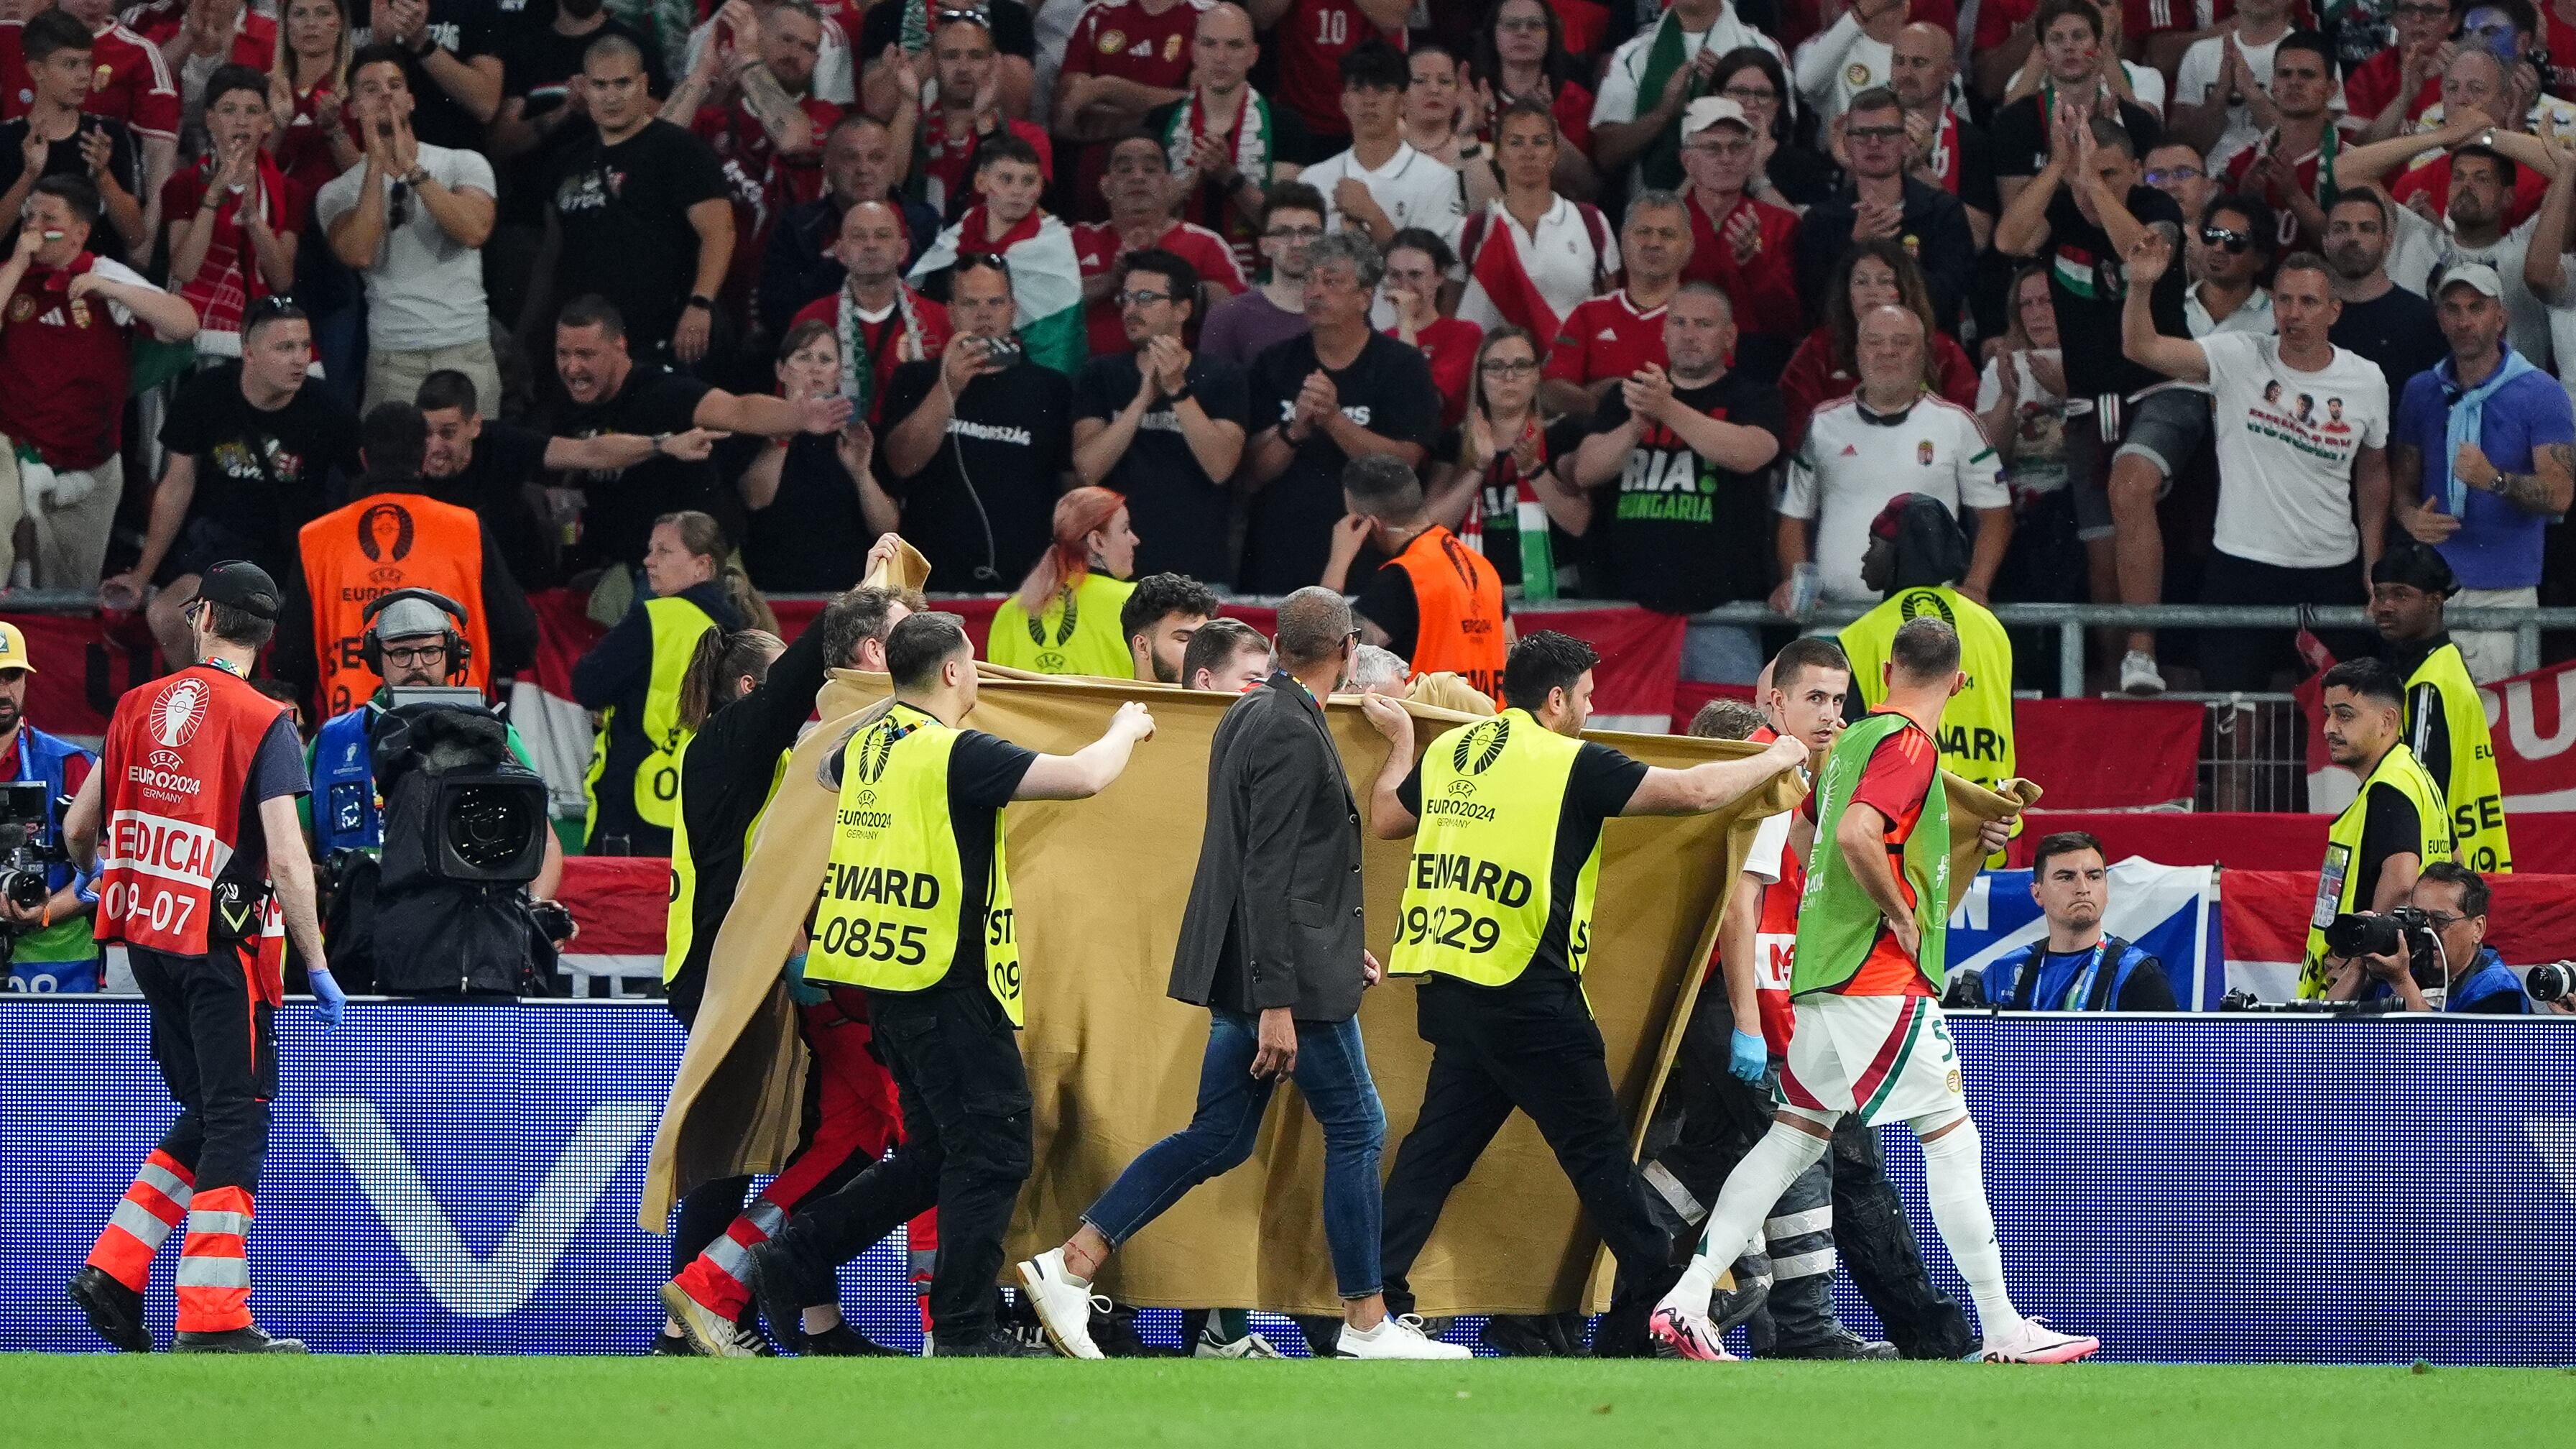 Hungary’s Barnabas Varga is taken from the pitch on a stretcher